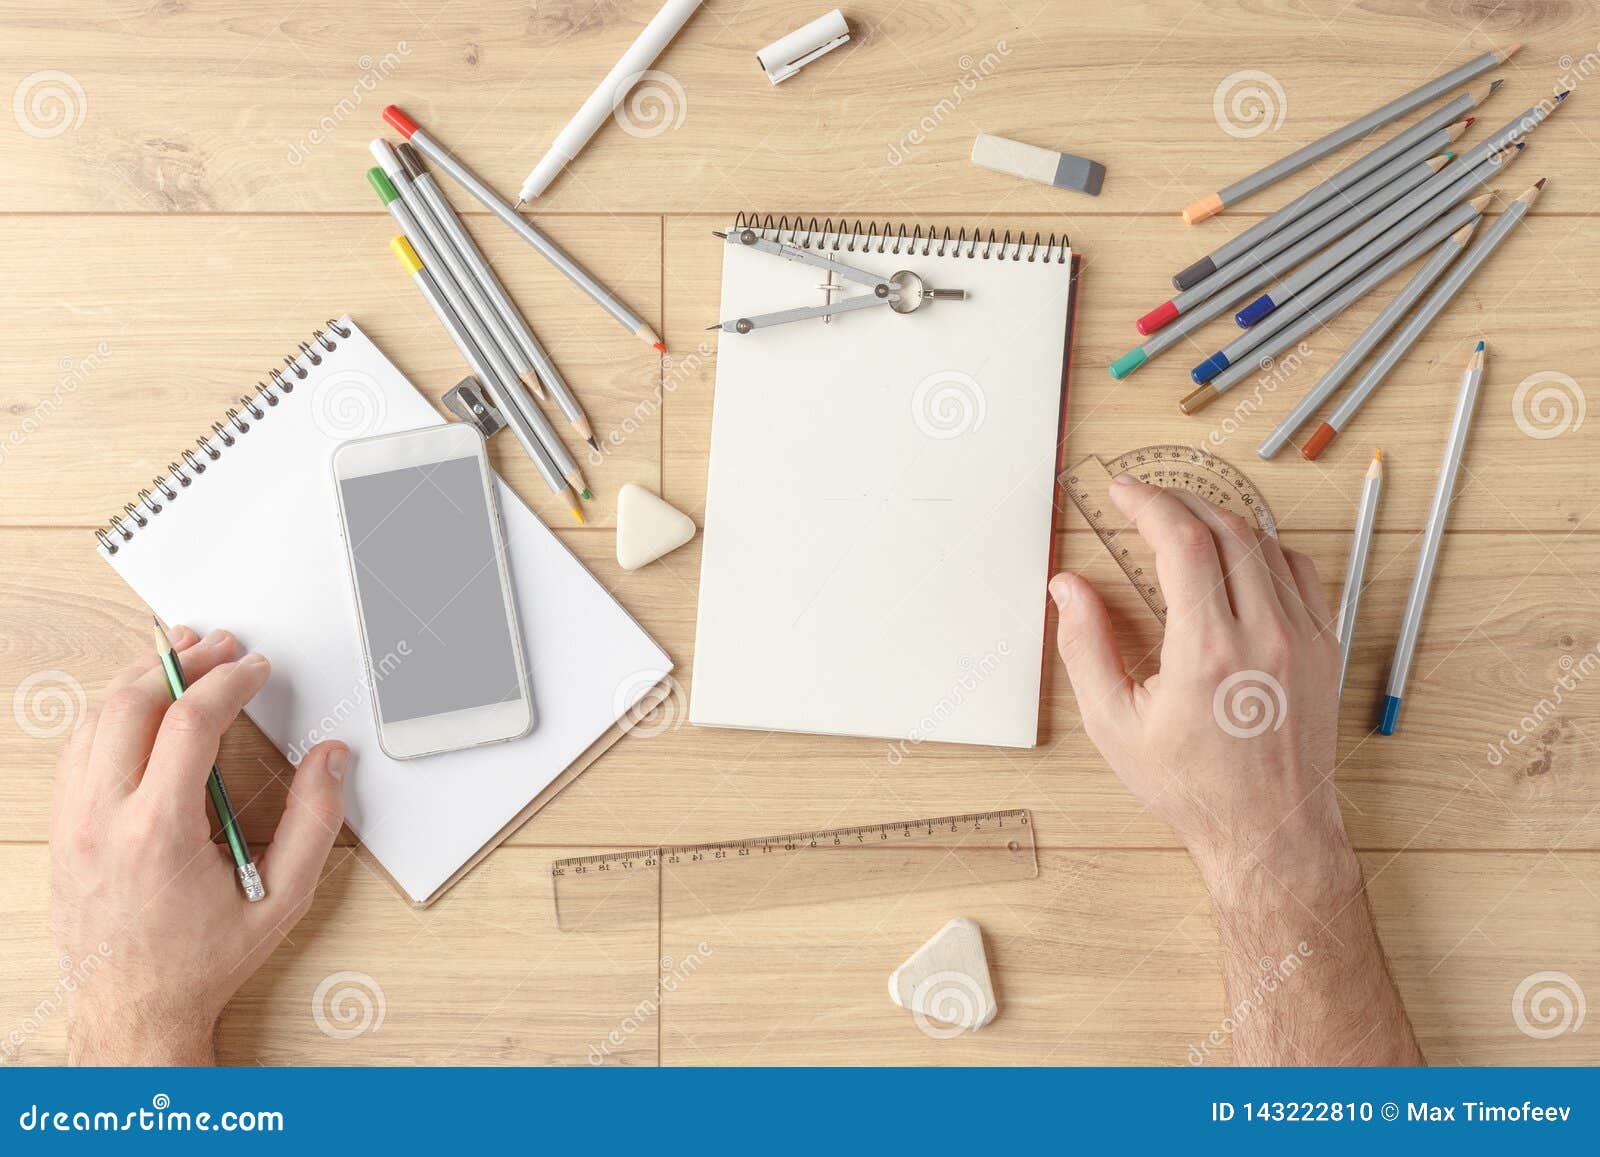 The Designer Draws A Sketch In A Notebook On A Wooden Table